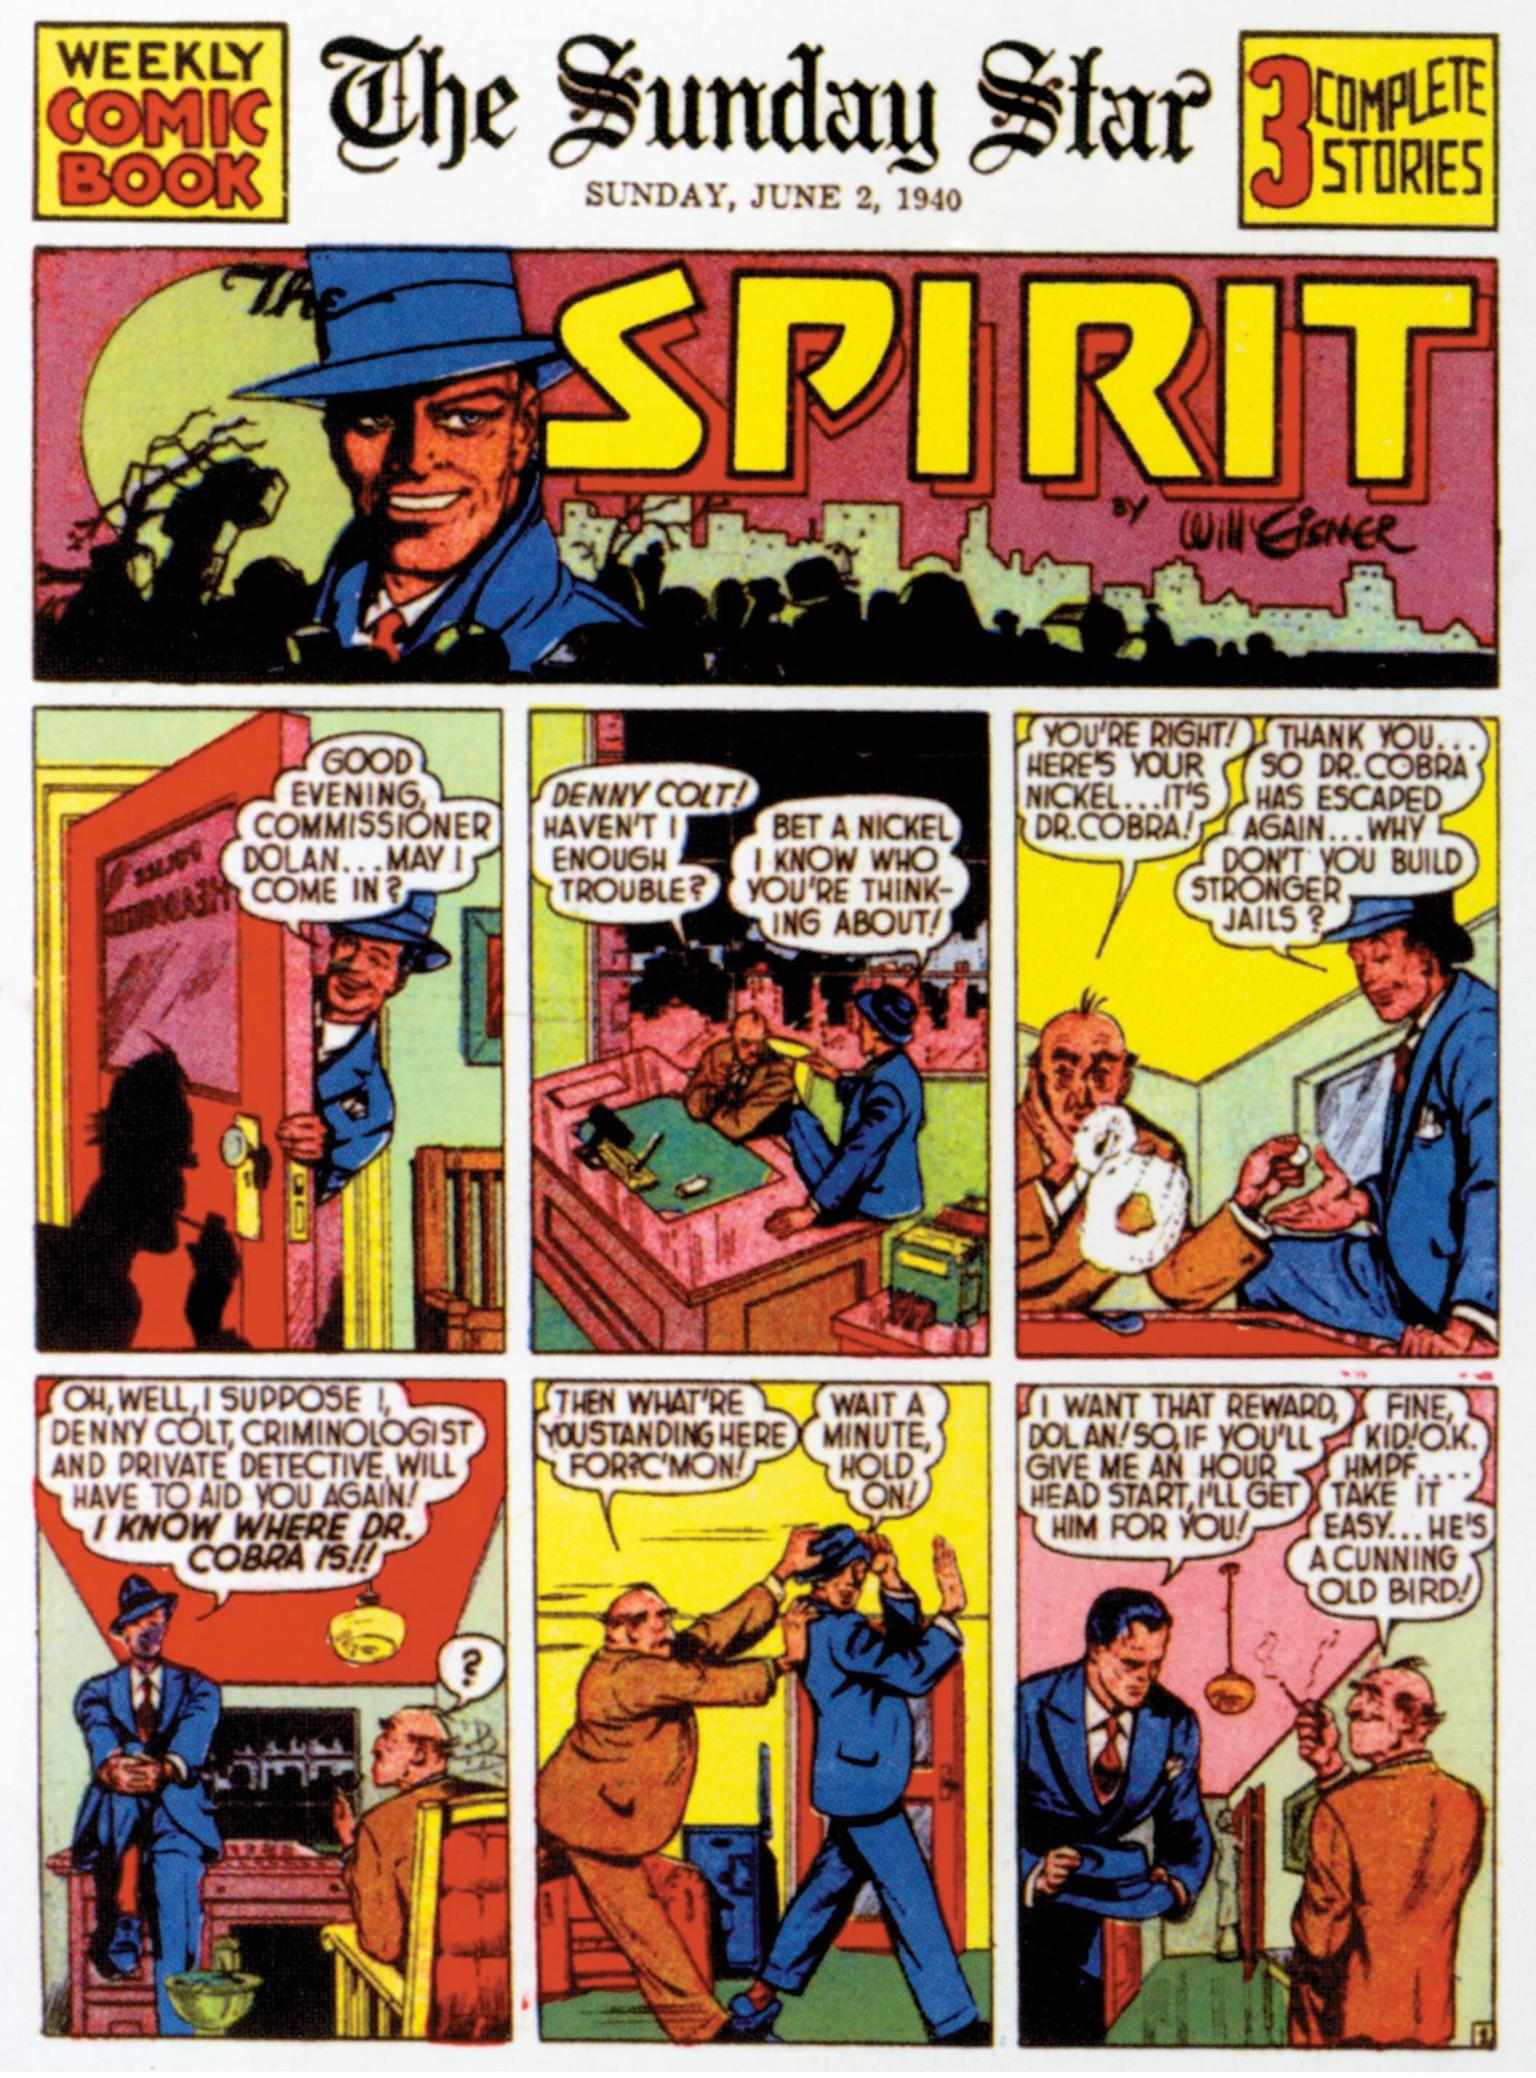 Newstrip comic with two rows of headings across the top, and two rows of three comic panels each with image and English text in bubbles, featuring man in suit speaking to another man in an office.